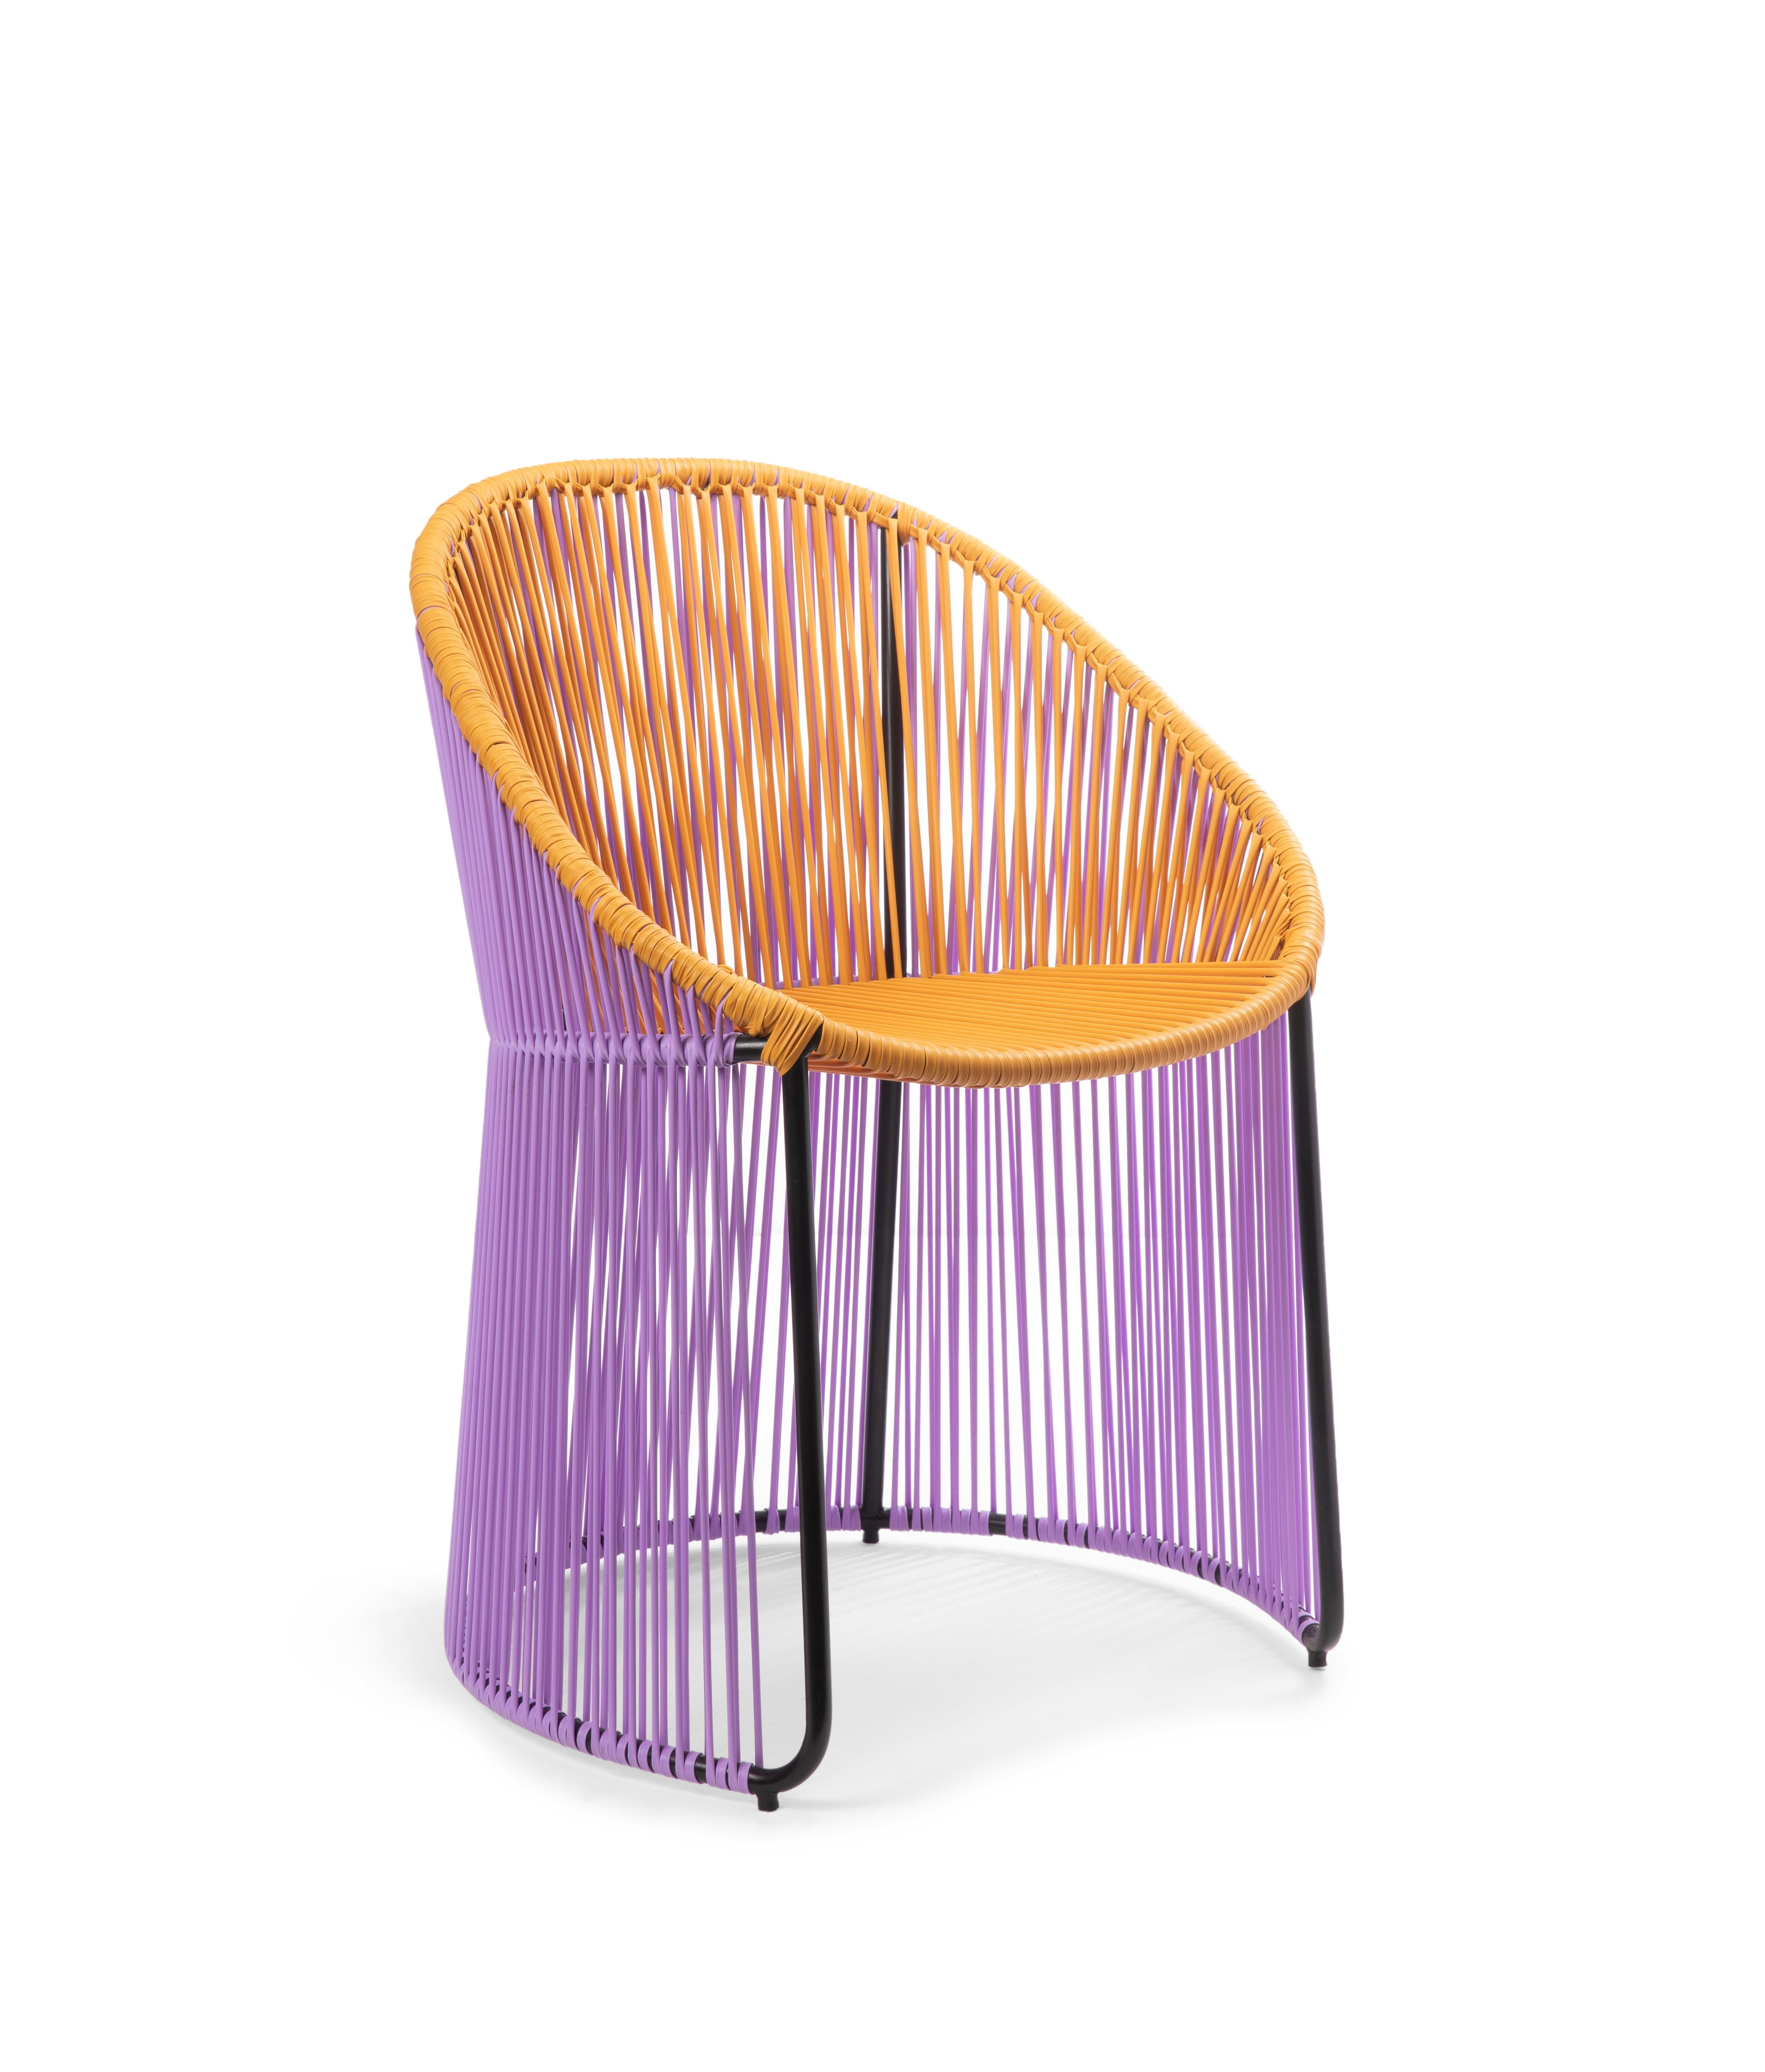 Honey/Lila Cartagenas dining chair by Sebastian Herkner
Materials: PVC strings. Galvanized and powder-coated tubular steel frame
Technique: made from recycled plastic. Weaved by local craftspeople in Colombia. 
Dimensions: W 60.2 x D 53.8 x H 84